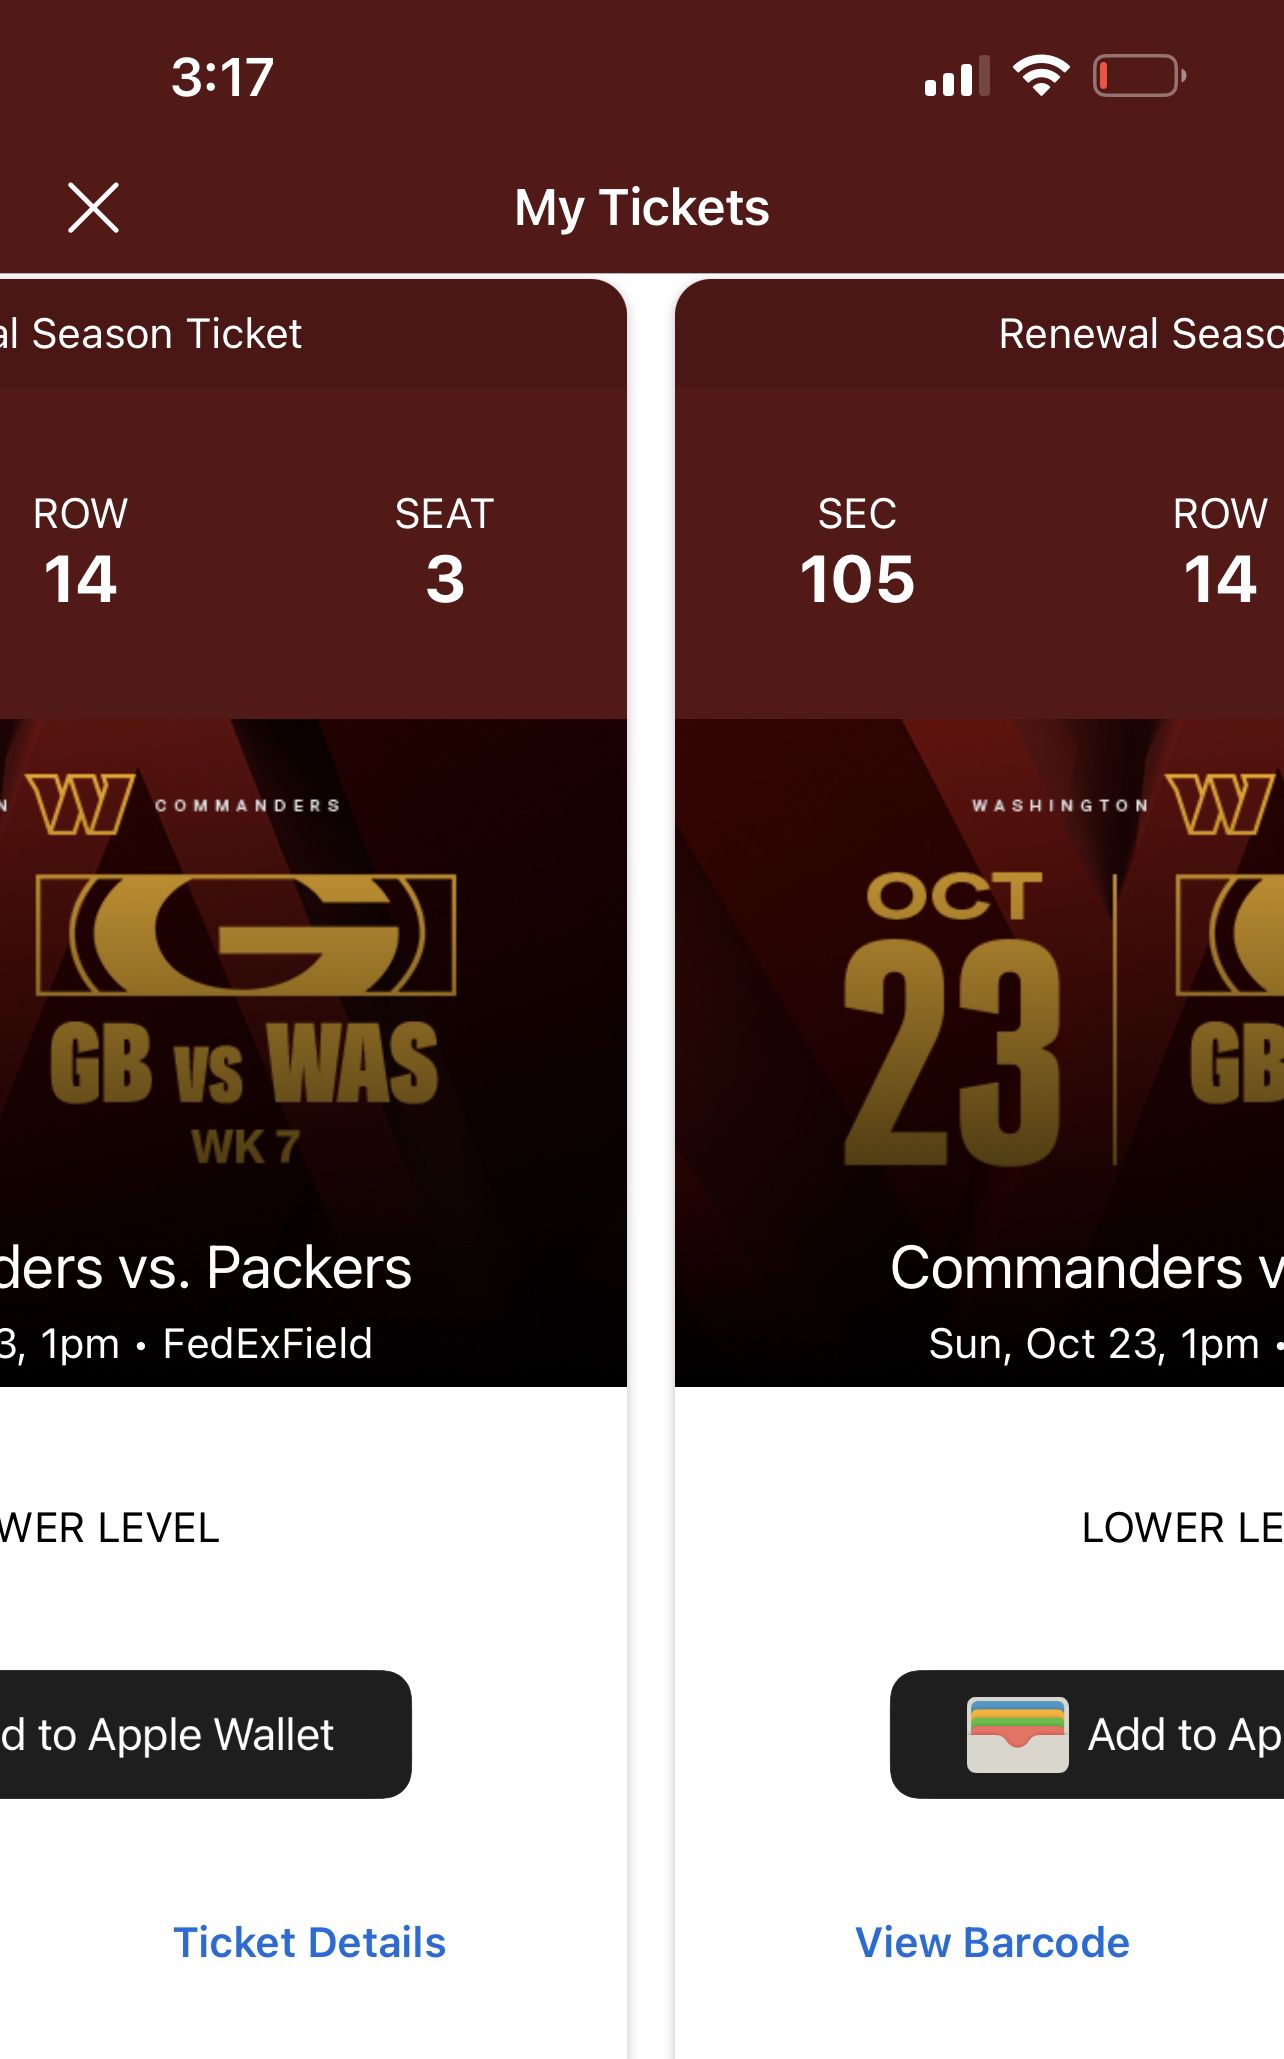 100 Level Commanders Vs Packers Tickets!!!